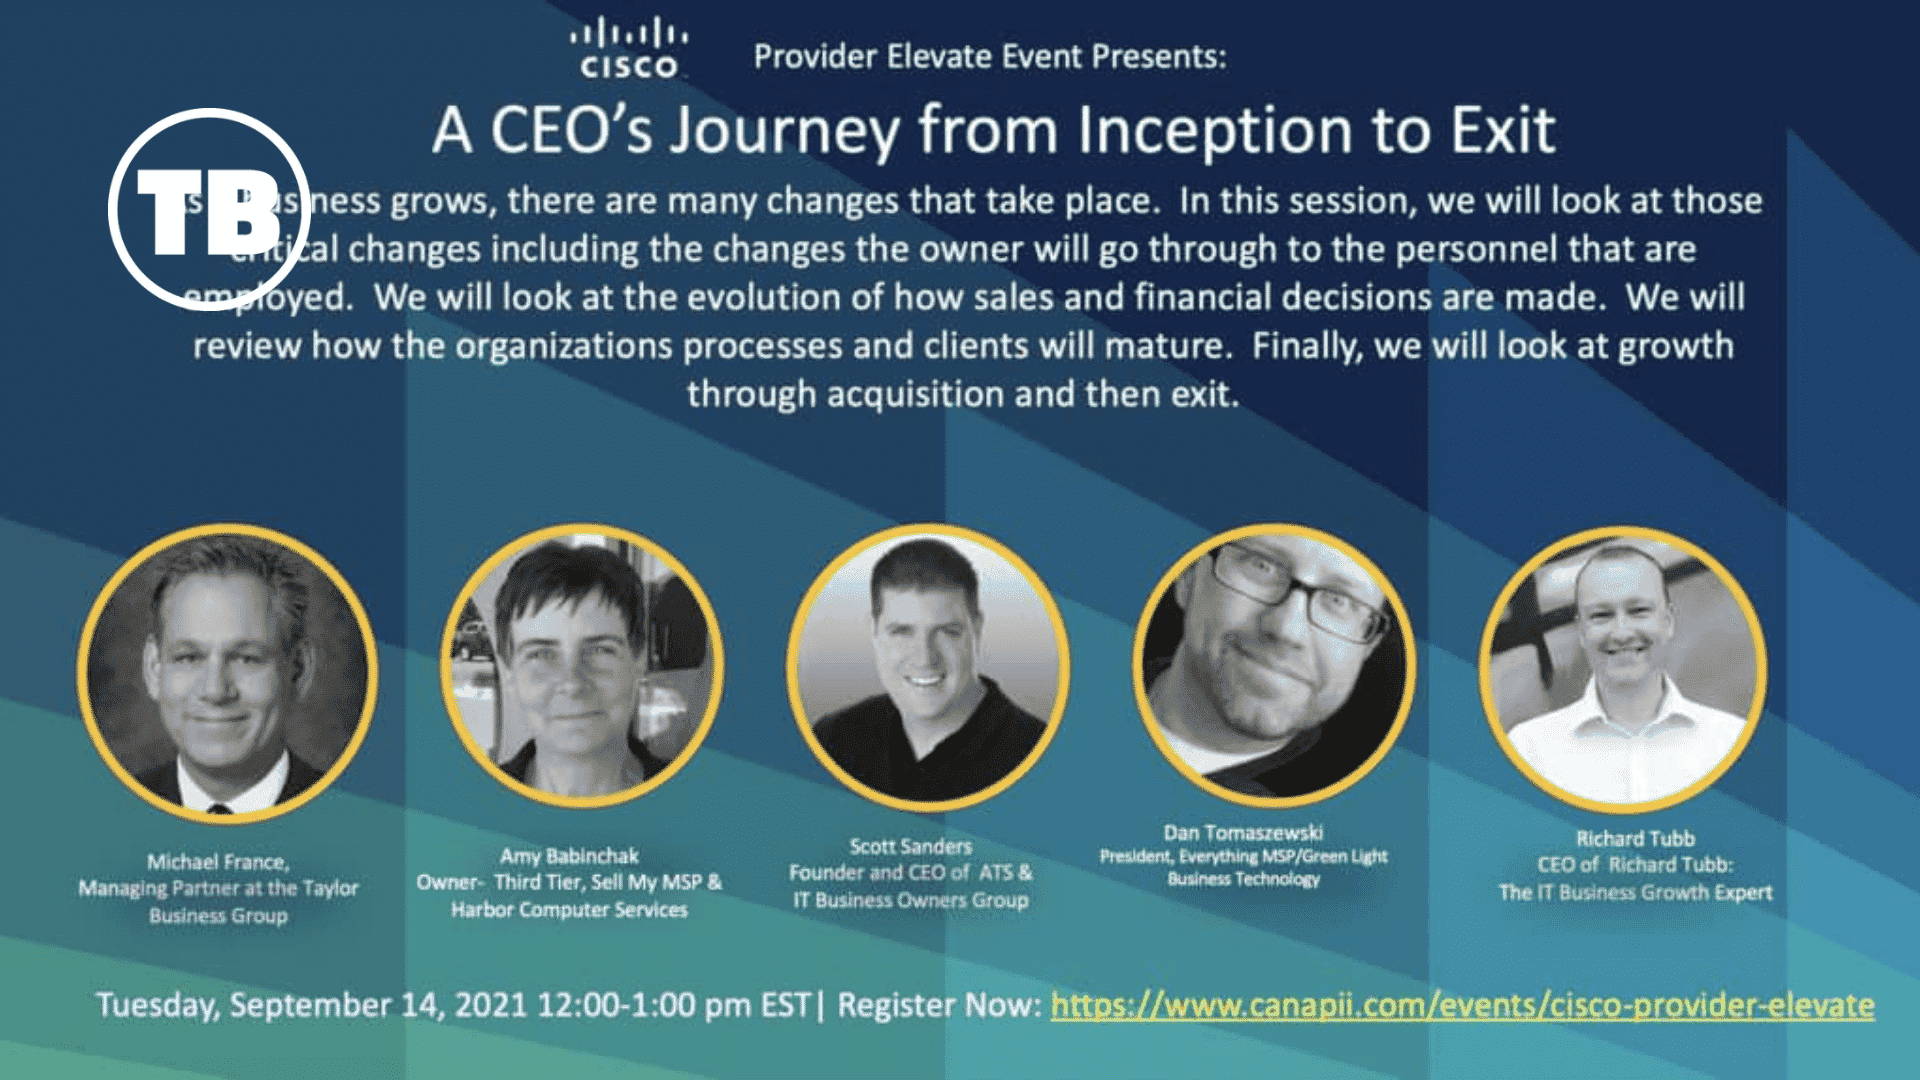 A CEO’s Journey from Inception to Exit: Cisco Provider Elevate Virtual Conference image